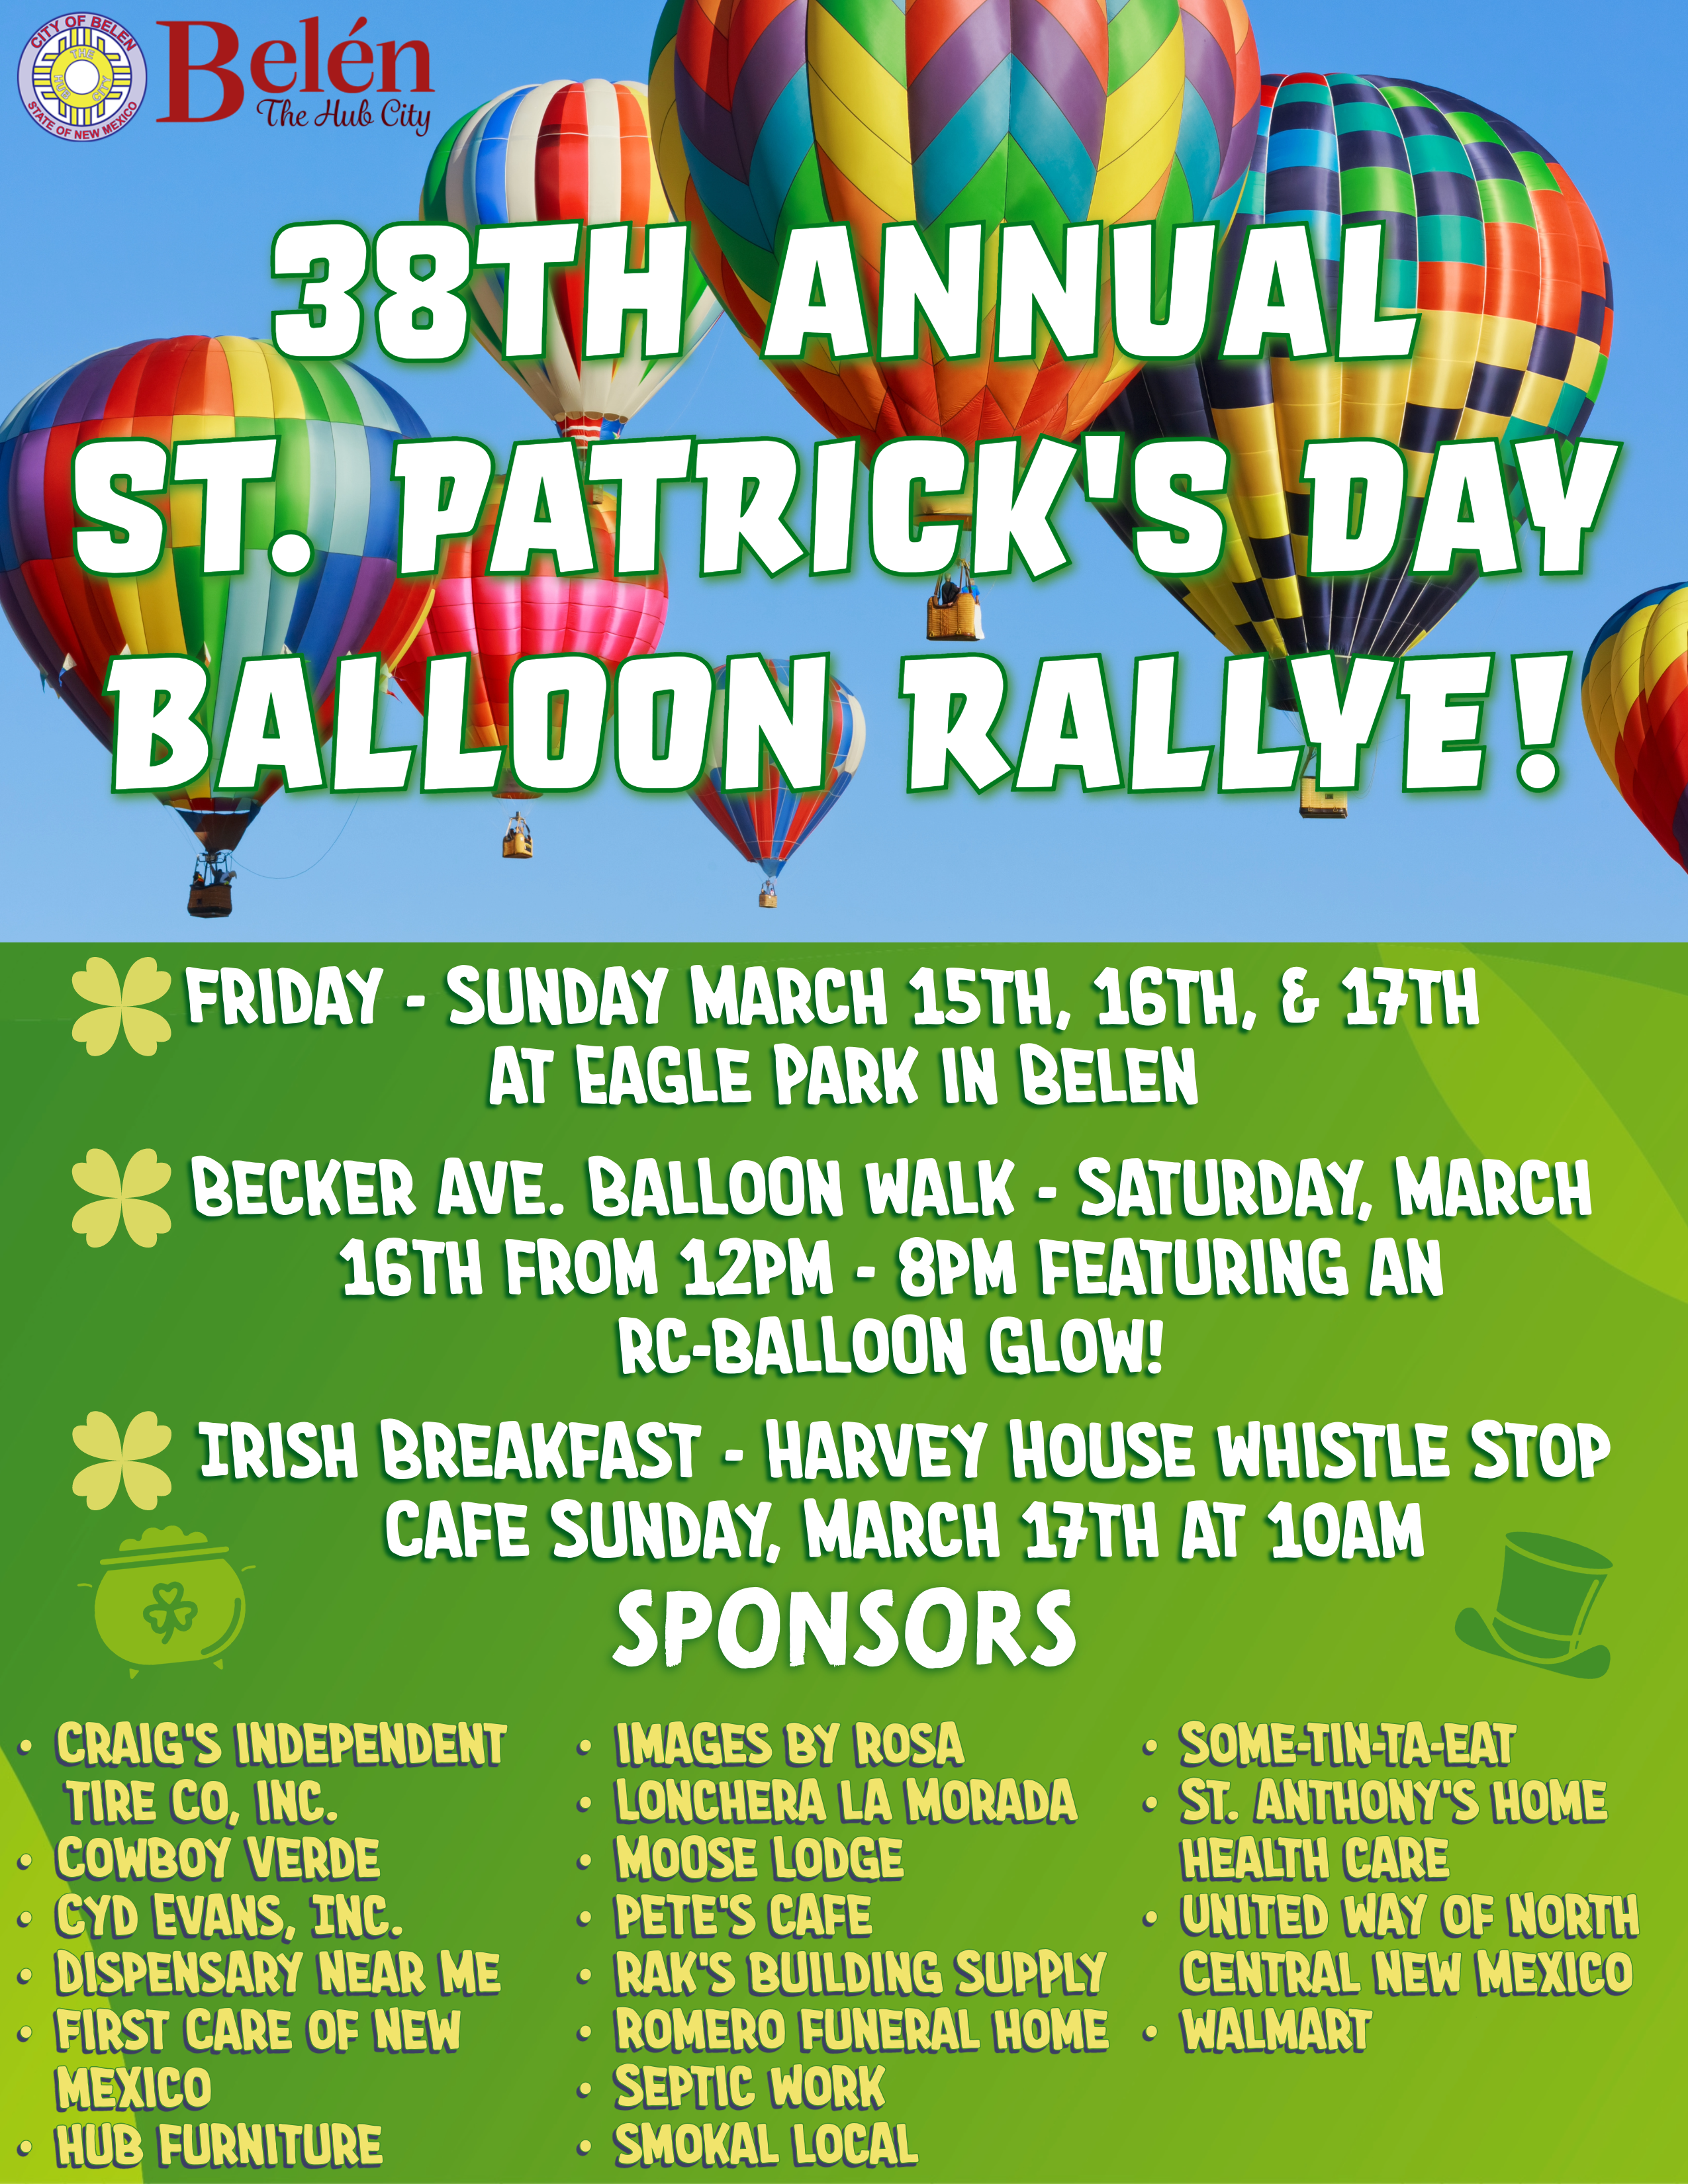 Featured image for “38th Annual St. Patrick’s Day Balloon Rallye!”